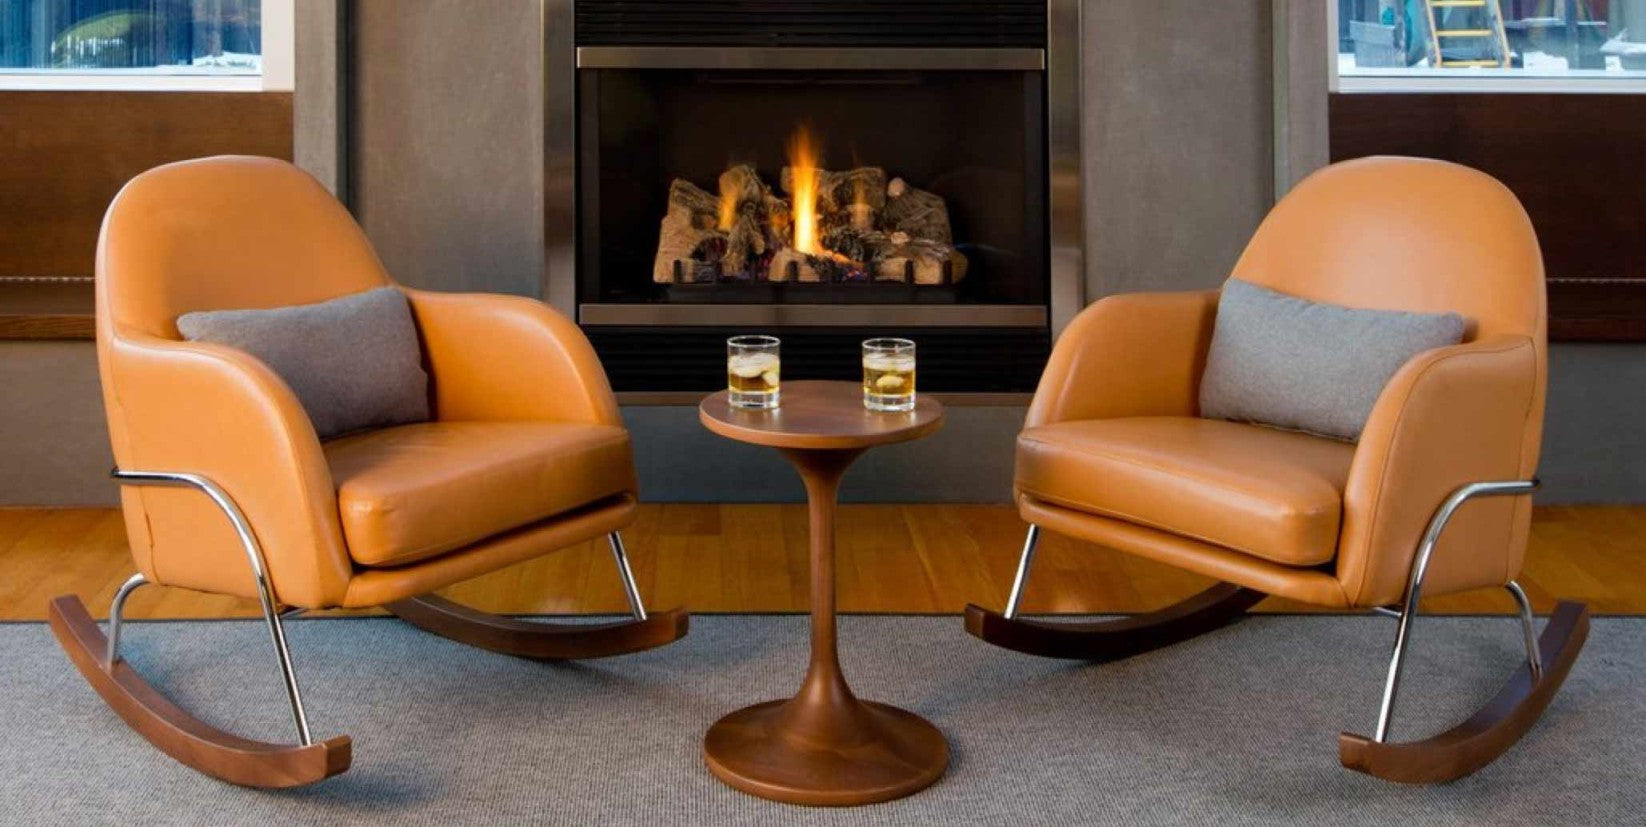 Two modernly designed brown leather rocking chairs sit comfortably in front of a fireplace. Two glasses of scotch on the rocks sit on a table in between.